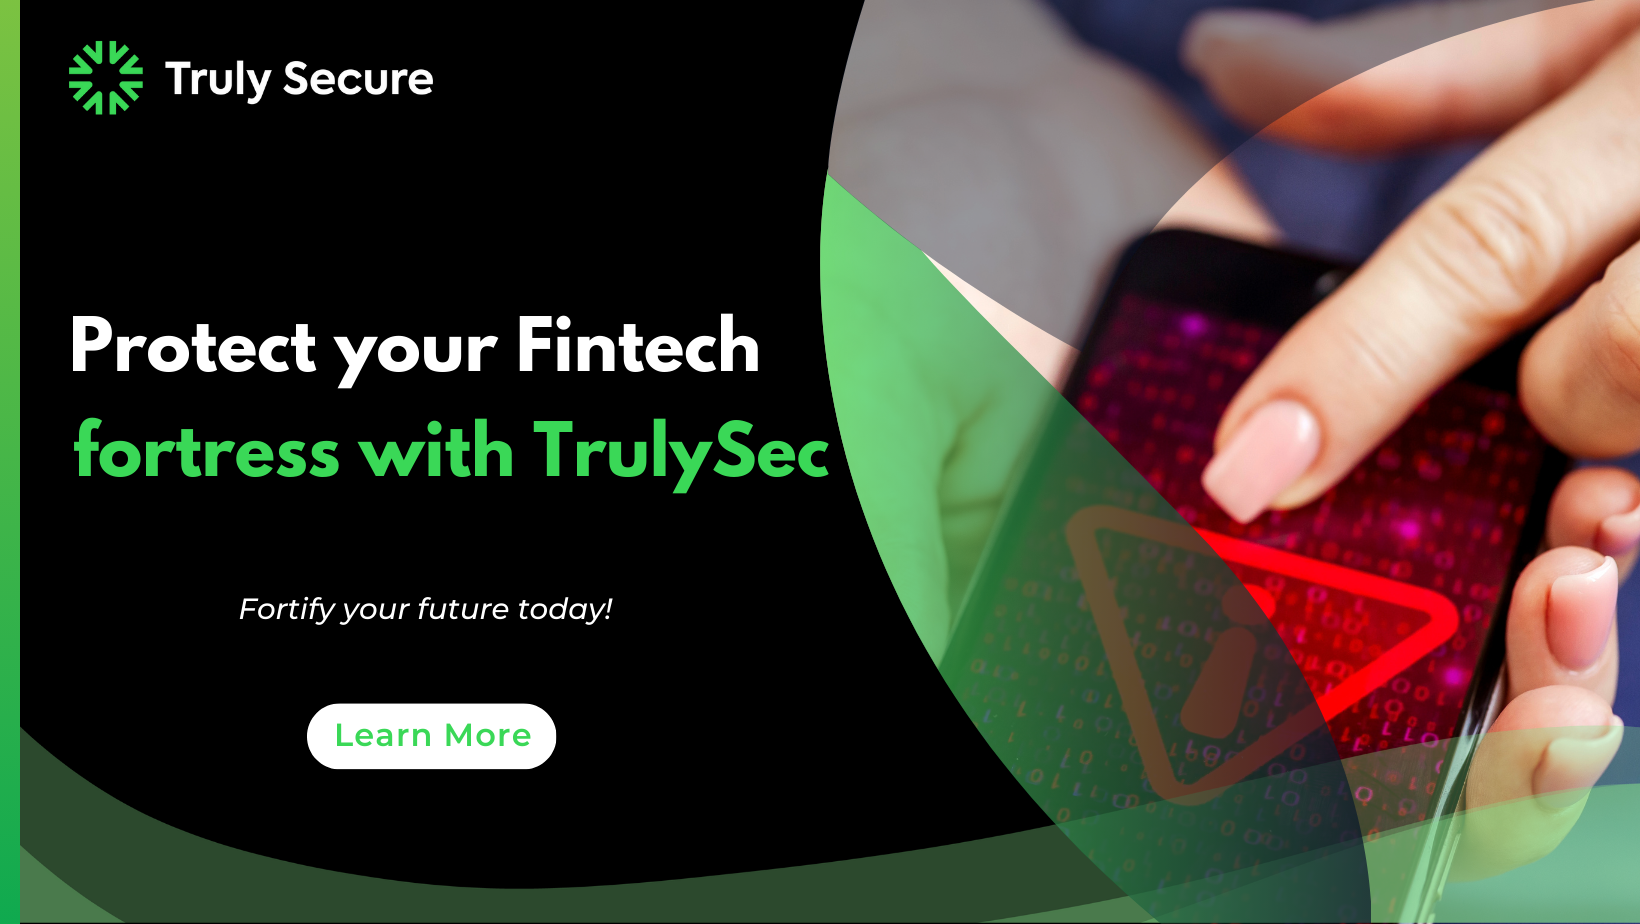 Protect Your Fintech with Truly Secure